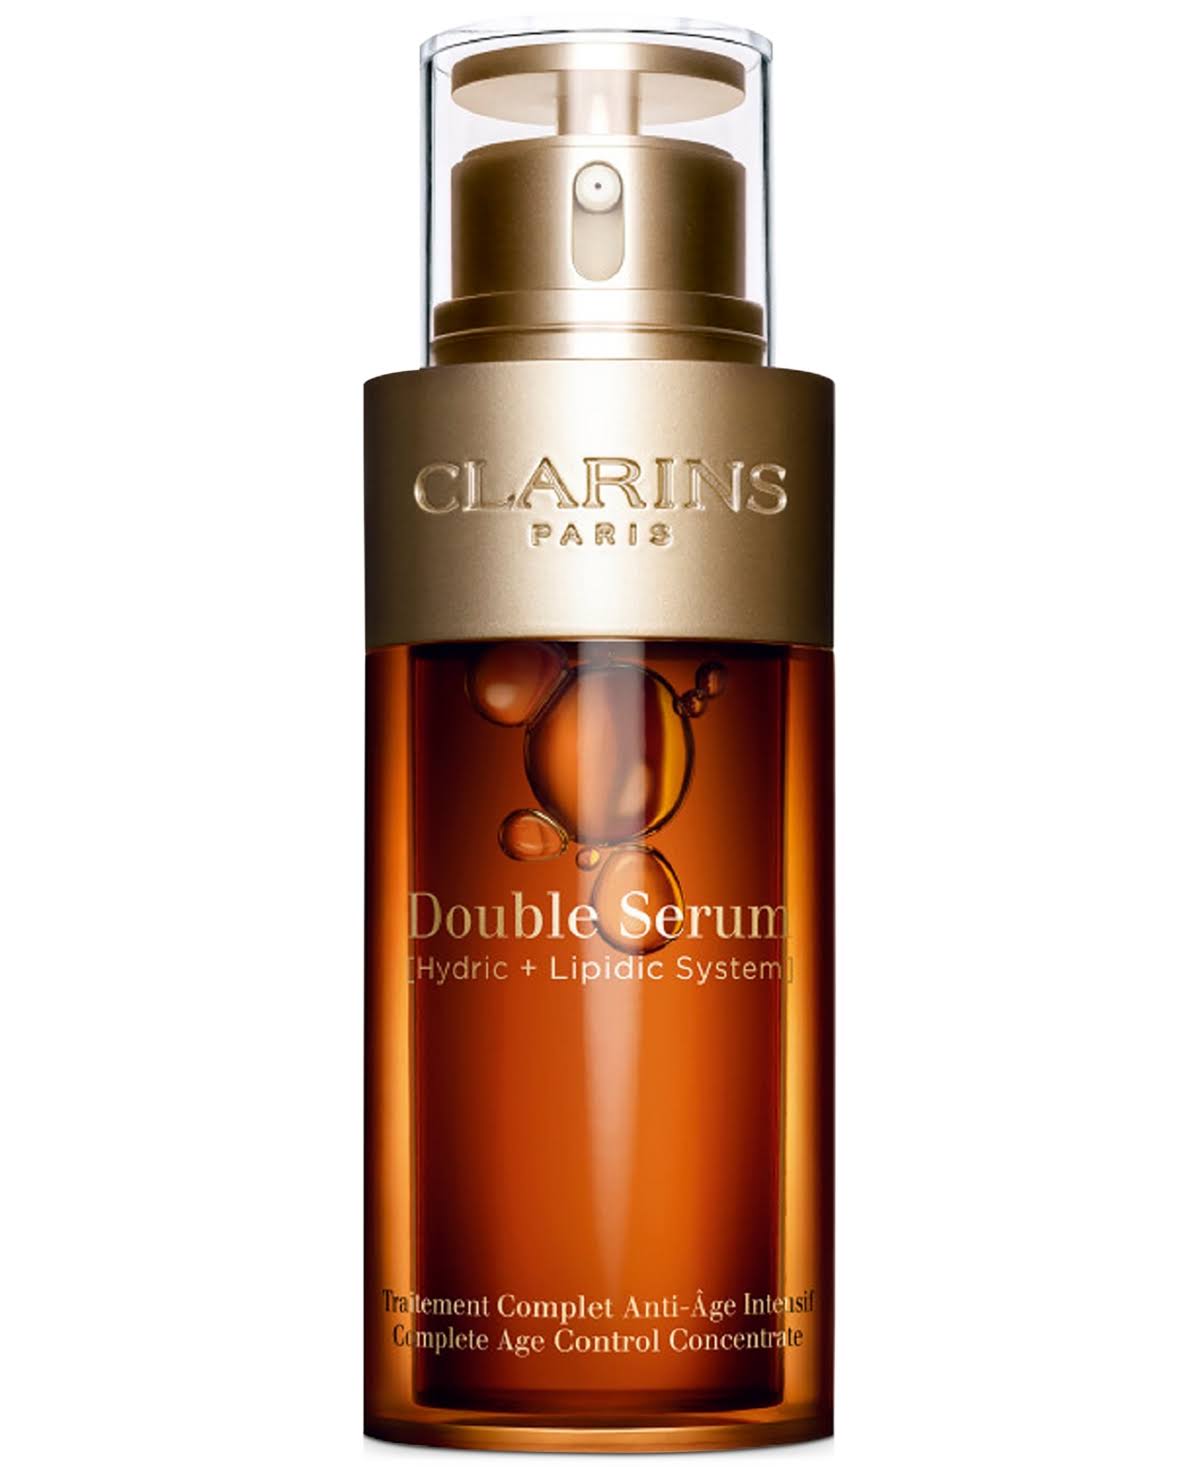 Clarins Double Serum Complete Age Control Concentrate - 2.5 oz.